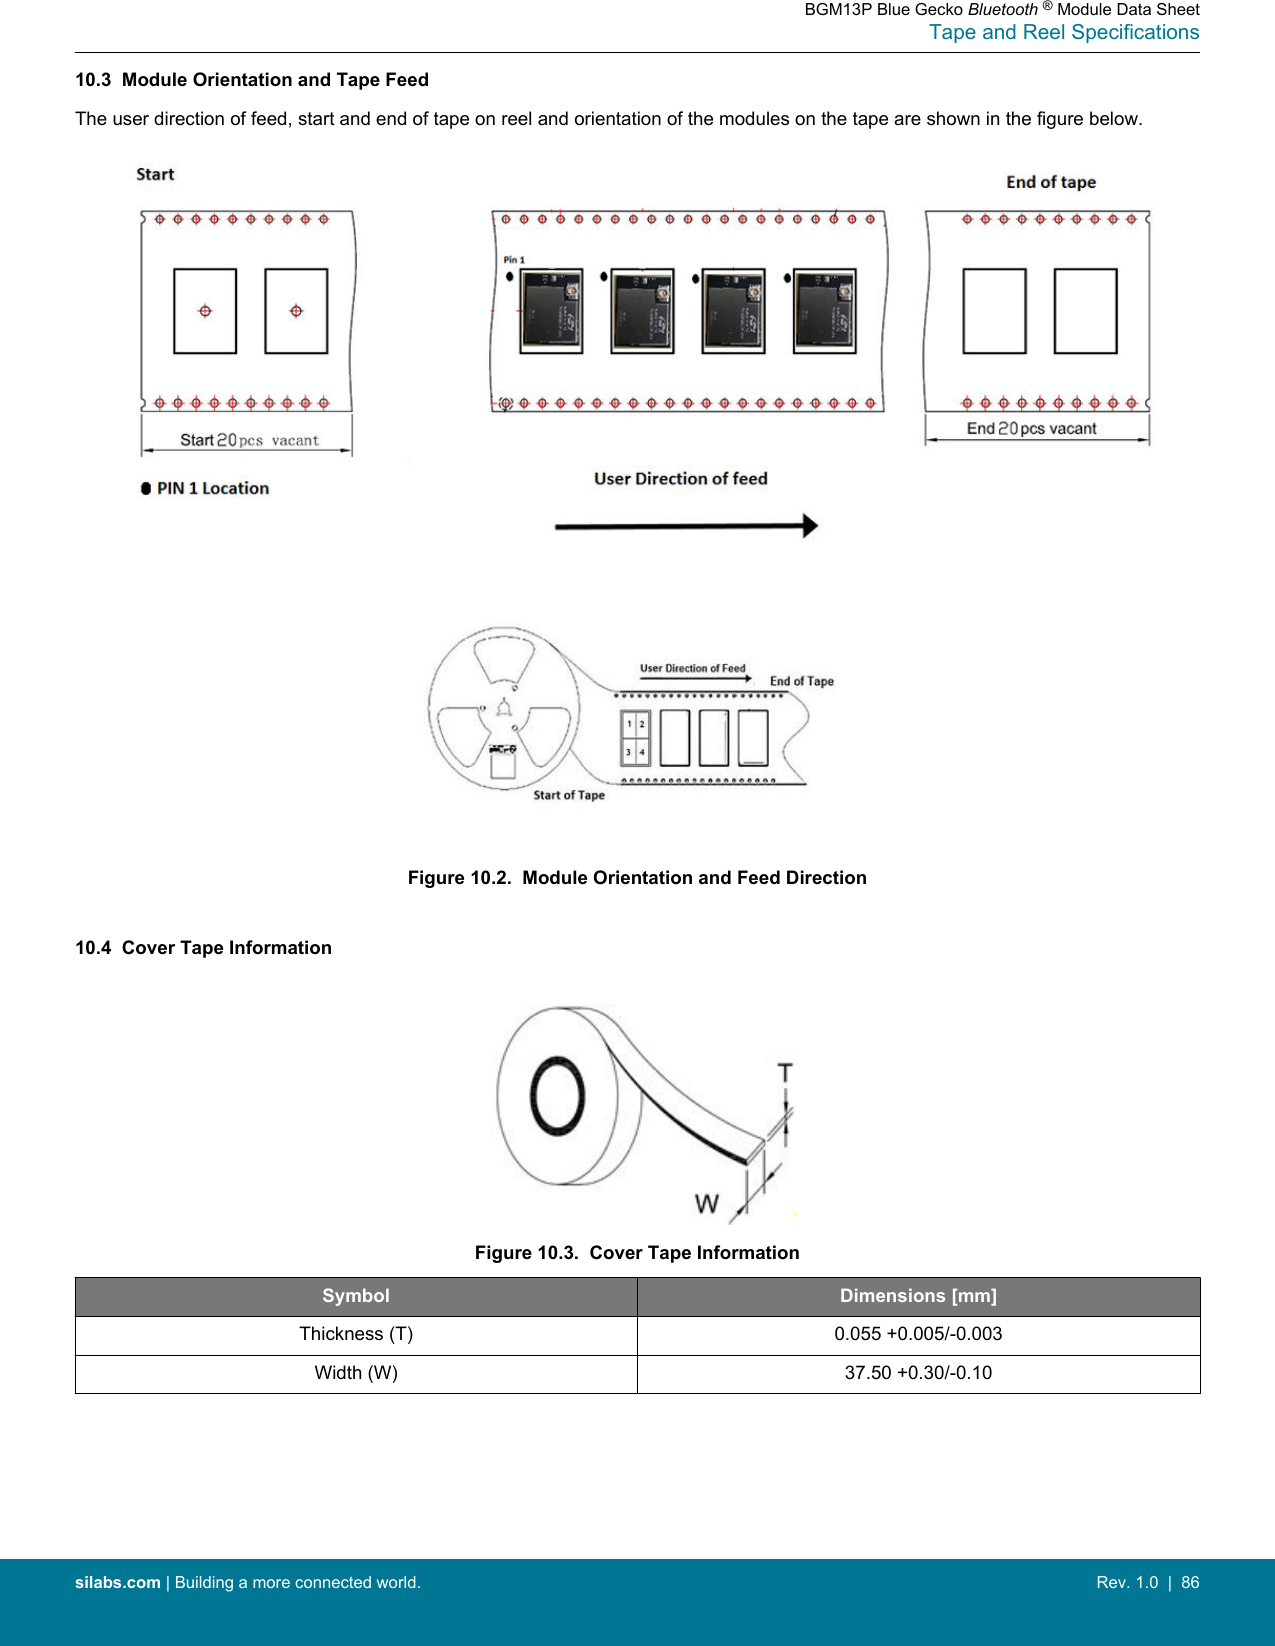 10.3  Module Orientation and Tape FeedThe user direction of feed, start and end of tape on reel and orientation of the modules on the tape are shown in the figure below.Figure 10.2.  Module Orientation and Feed Direction10.4  Cover Tape InformationFigure 10.3.  Cover Tape InformationSymbol Dimensions [mm]Thickness (T) 0.055 +0.005/-0.003Width (W) 37.50 +0.30/-0.10BGM13P Blue Gecko Bluetooth ® Module Data SheetTape and Reel Specificationssilabs.com | Building a more connected world. Rev. 1.0  |  86